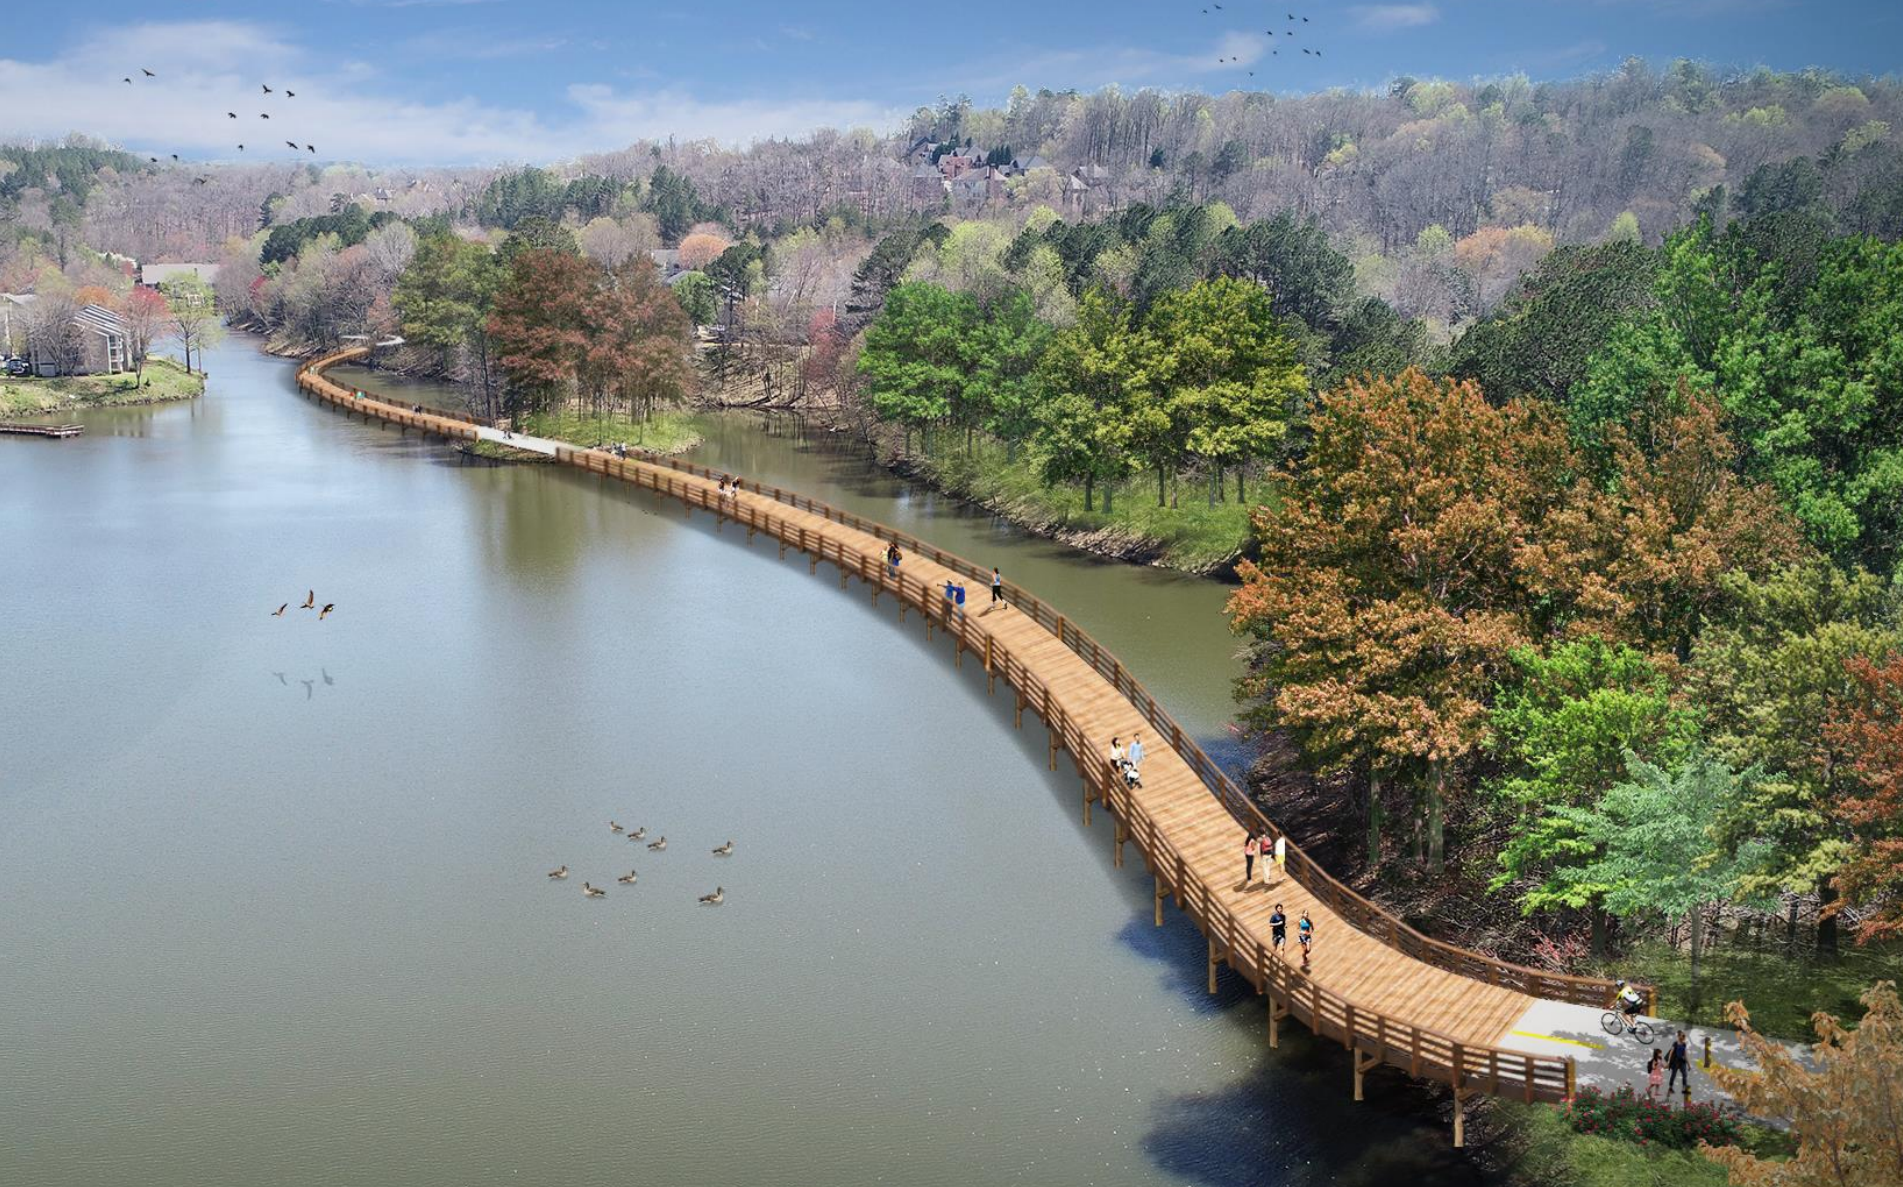 A rendering of a wooden footbridge snaking over a lake.